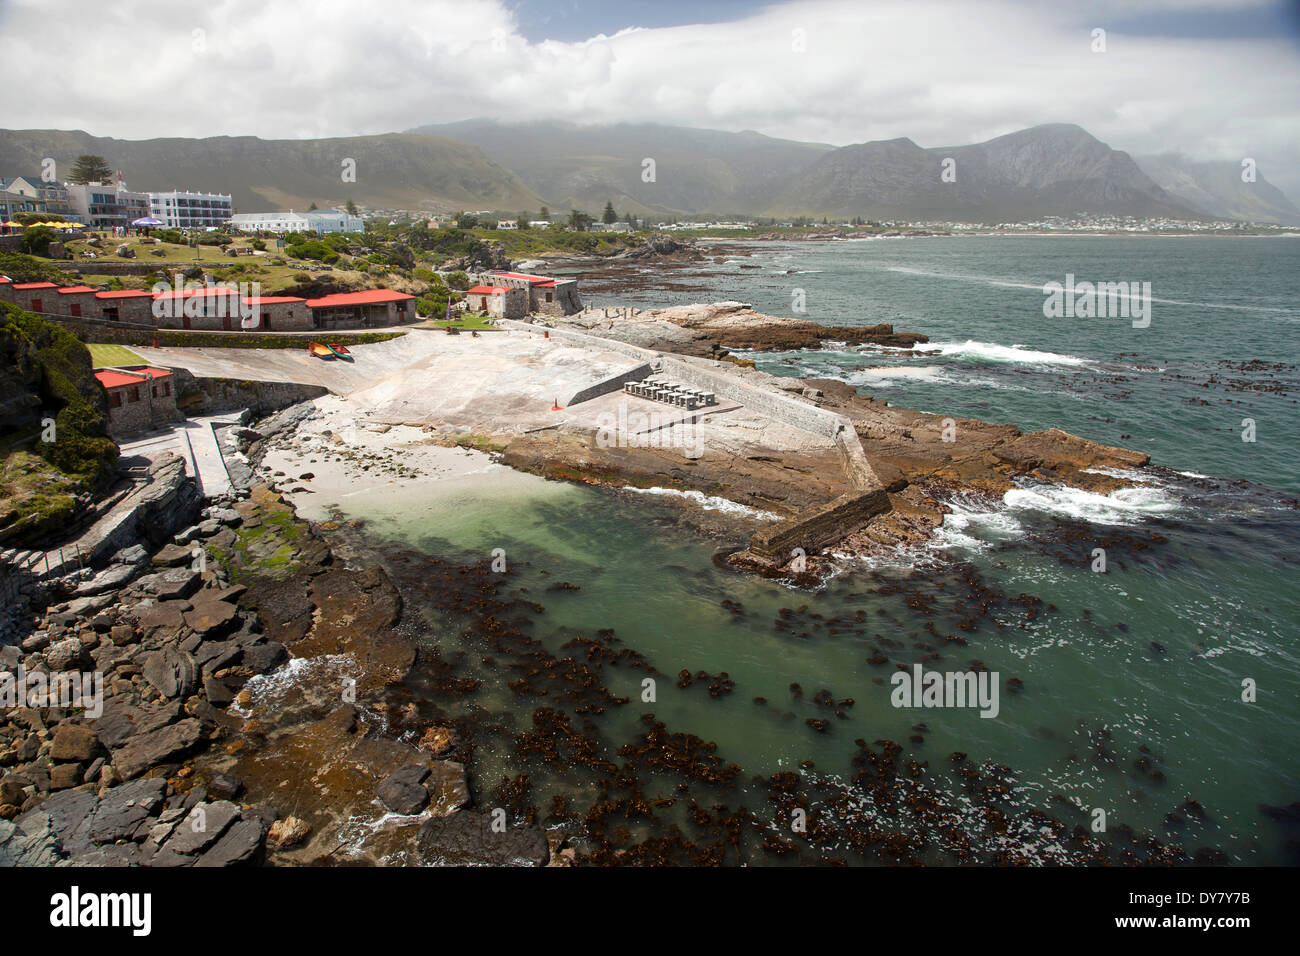 Port and coastline of Hermanus, Western Cape, South Africa Stock Photo